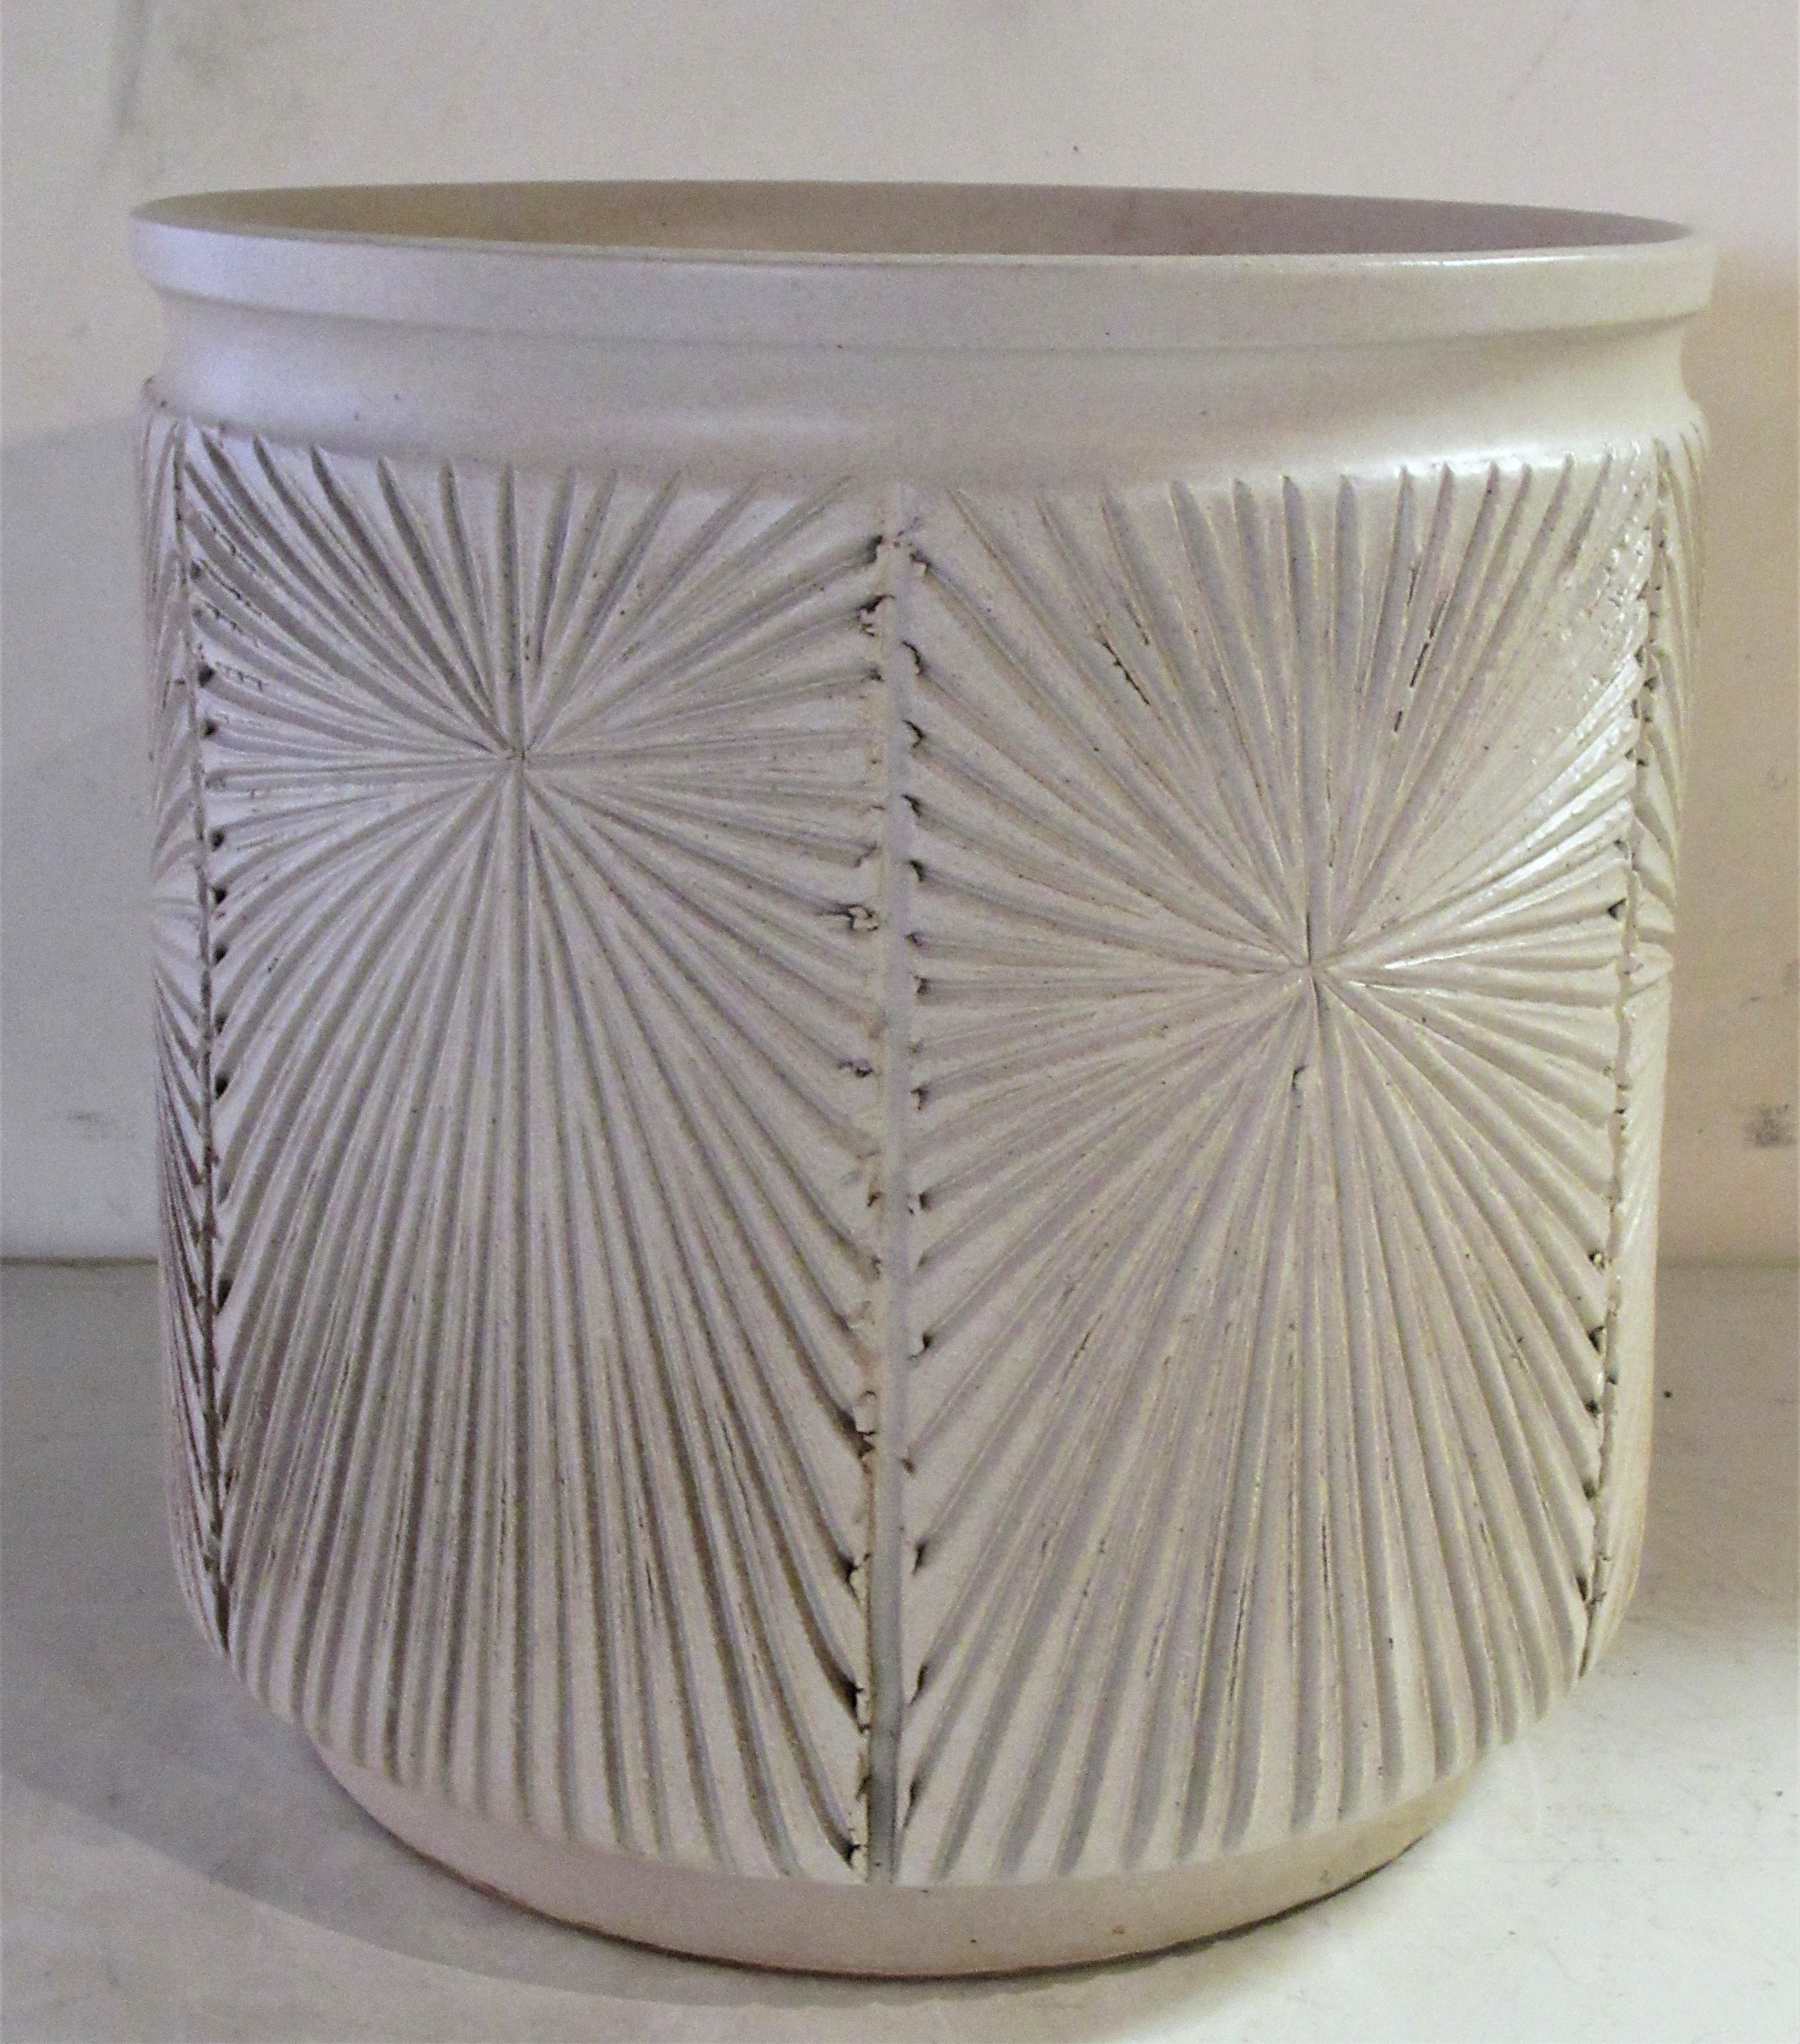 A large cylindrical earthgender architectural pottery planter in the hard to find original eggshell white glaze by Robert Maxwell and David Cressey in great vintage condition, circa 1970